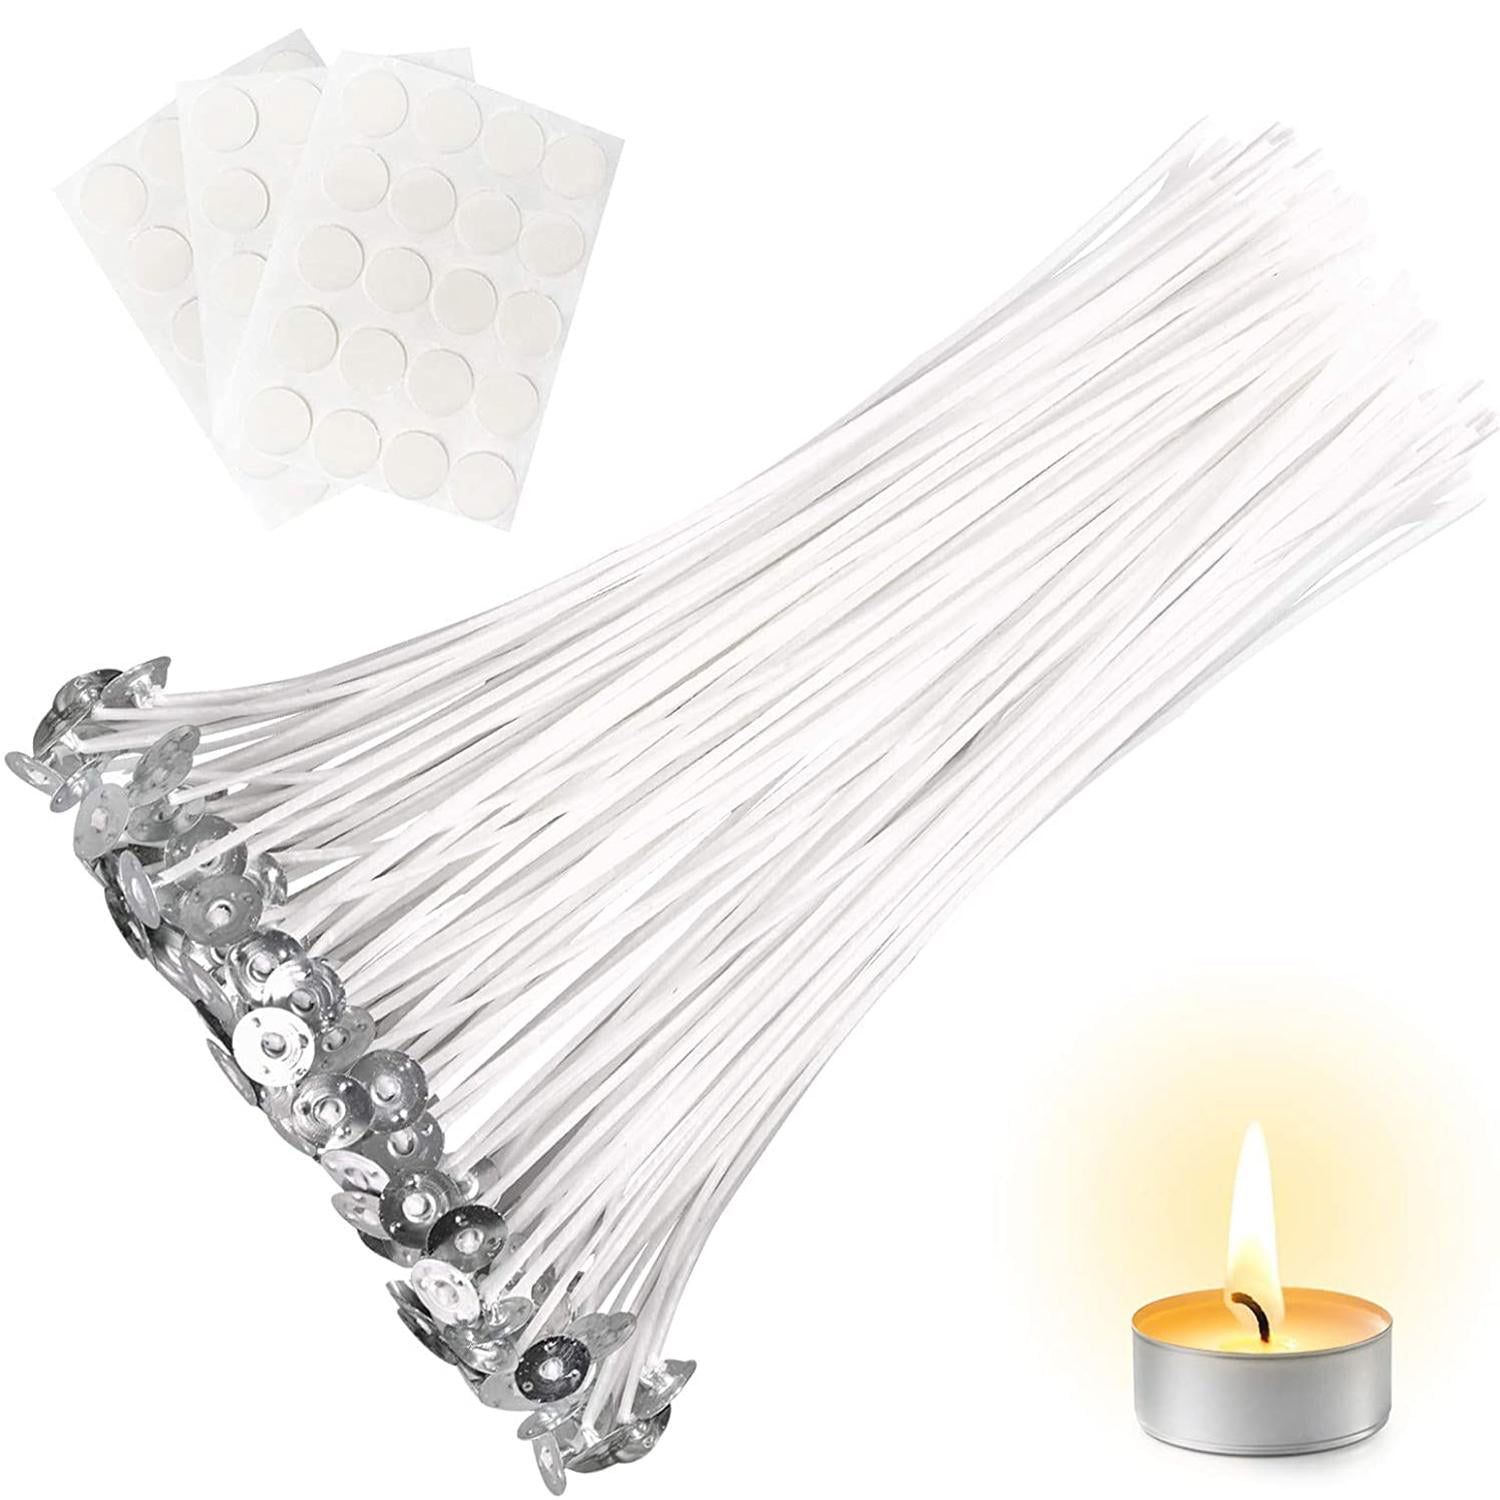 100 x Pre Waxed Wicks for Candle Making with Sustainers 20 x 3,5,8,10,12 cm 